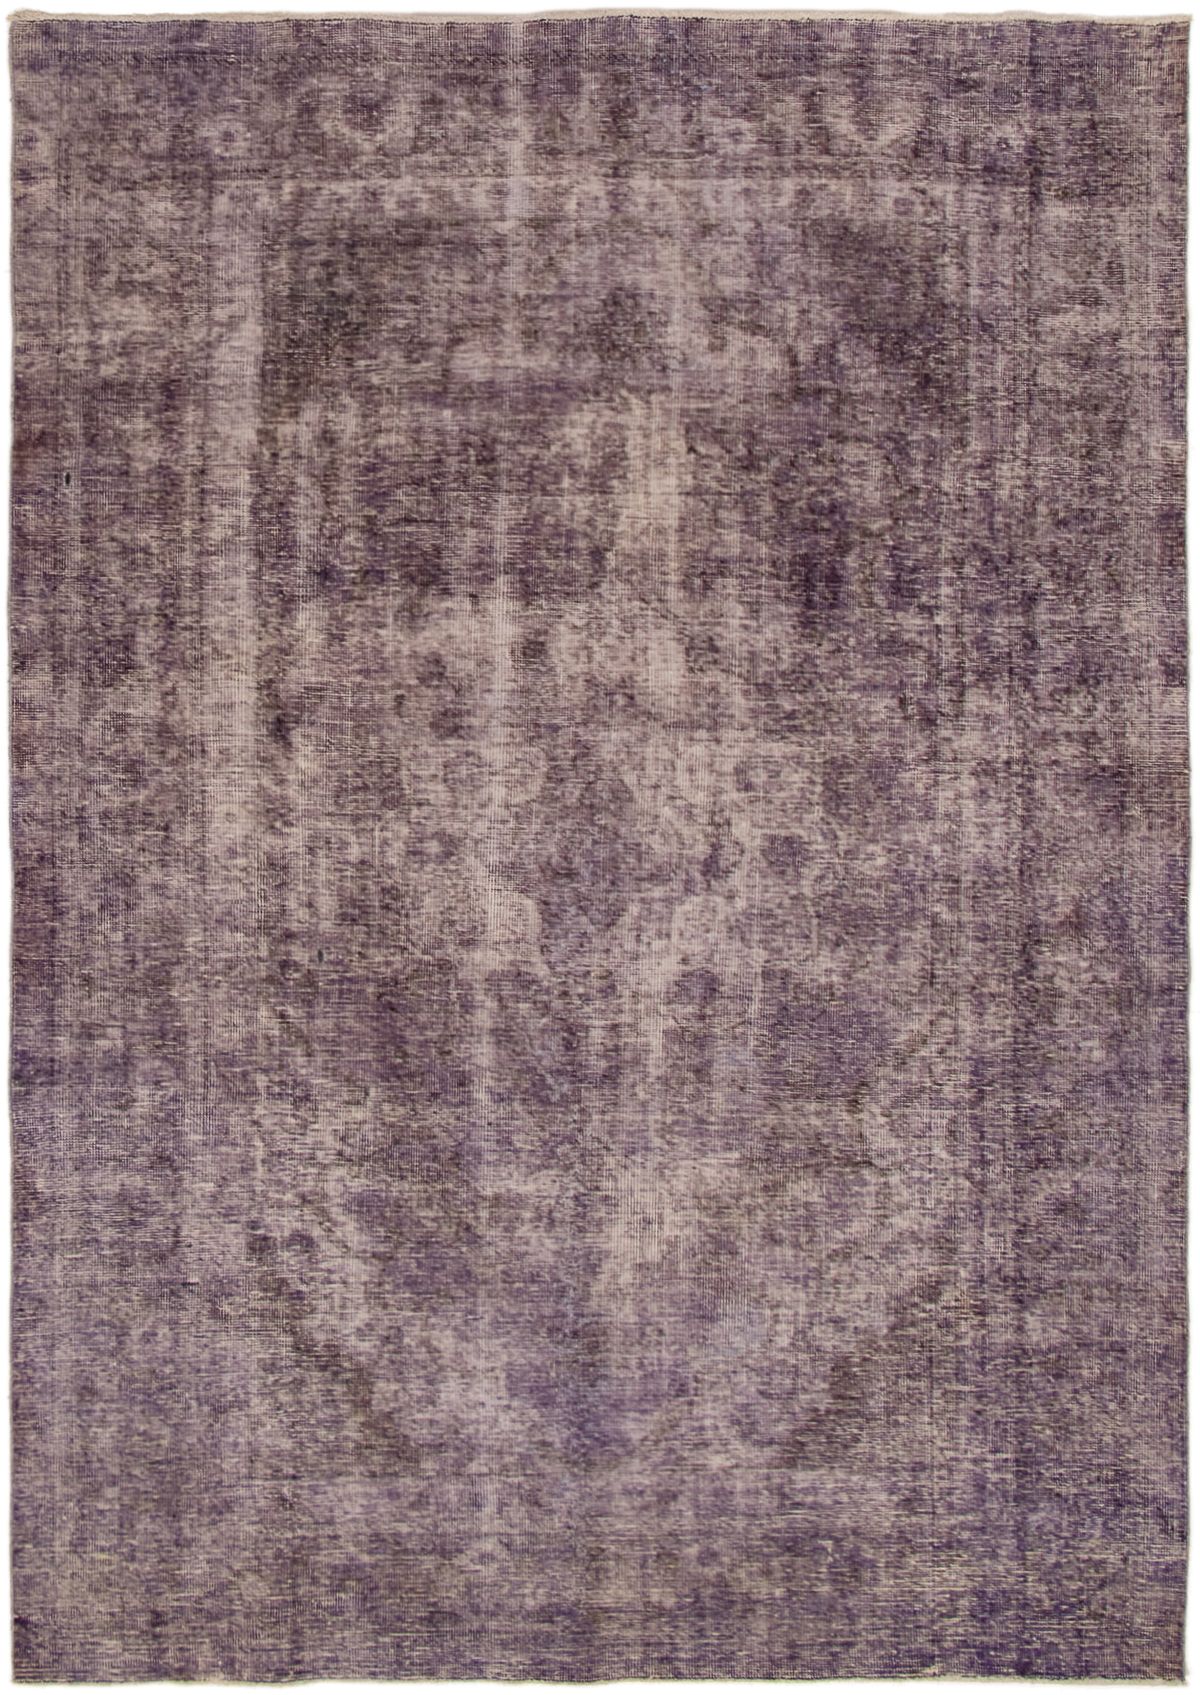 Hand-knotted Color Transition Purple Wool Rug 6'6" x 9'5" Size: 6'6" x 9'5"  